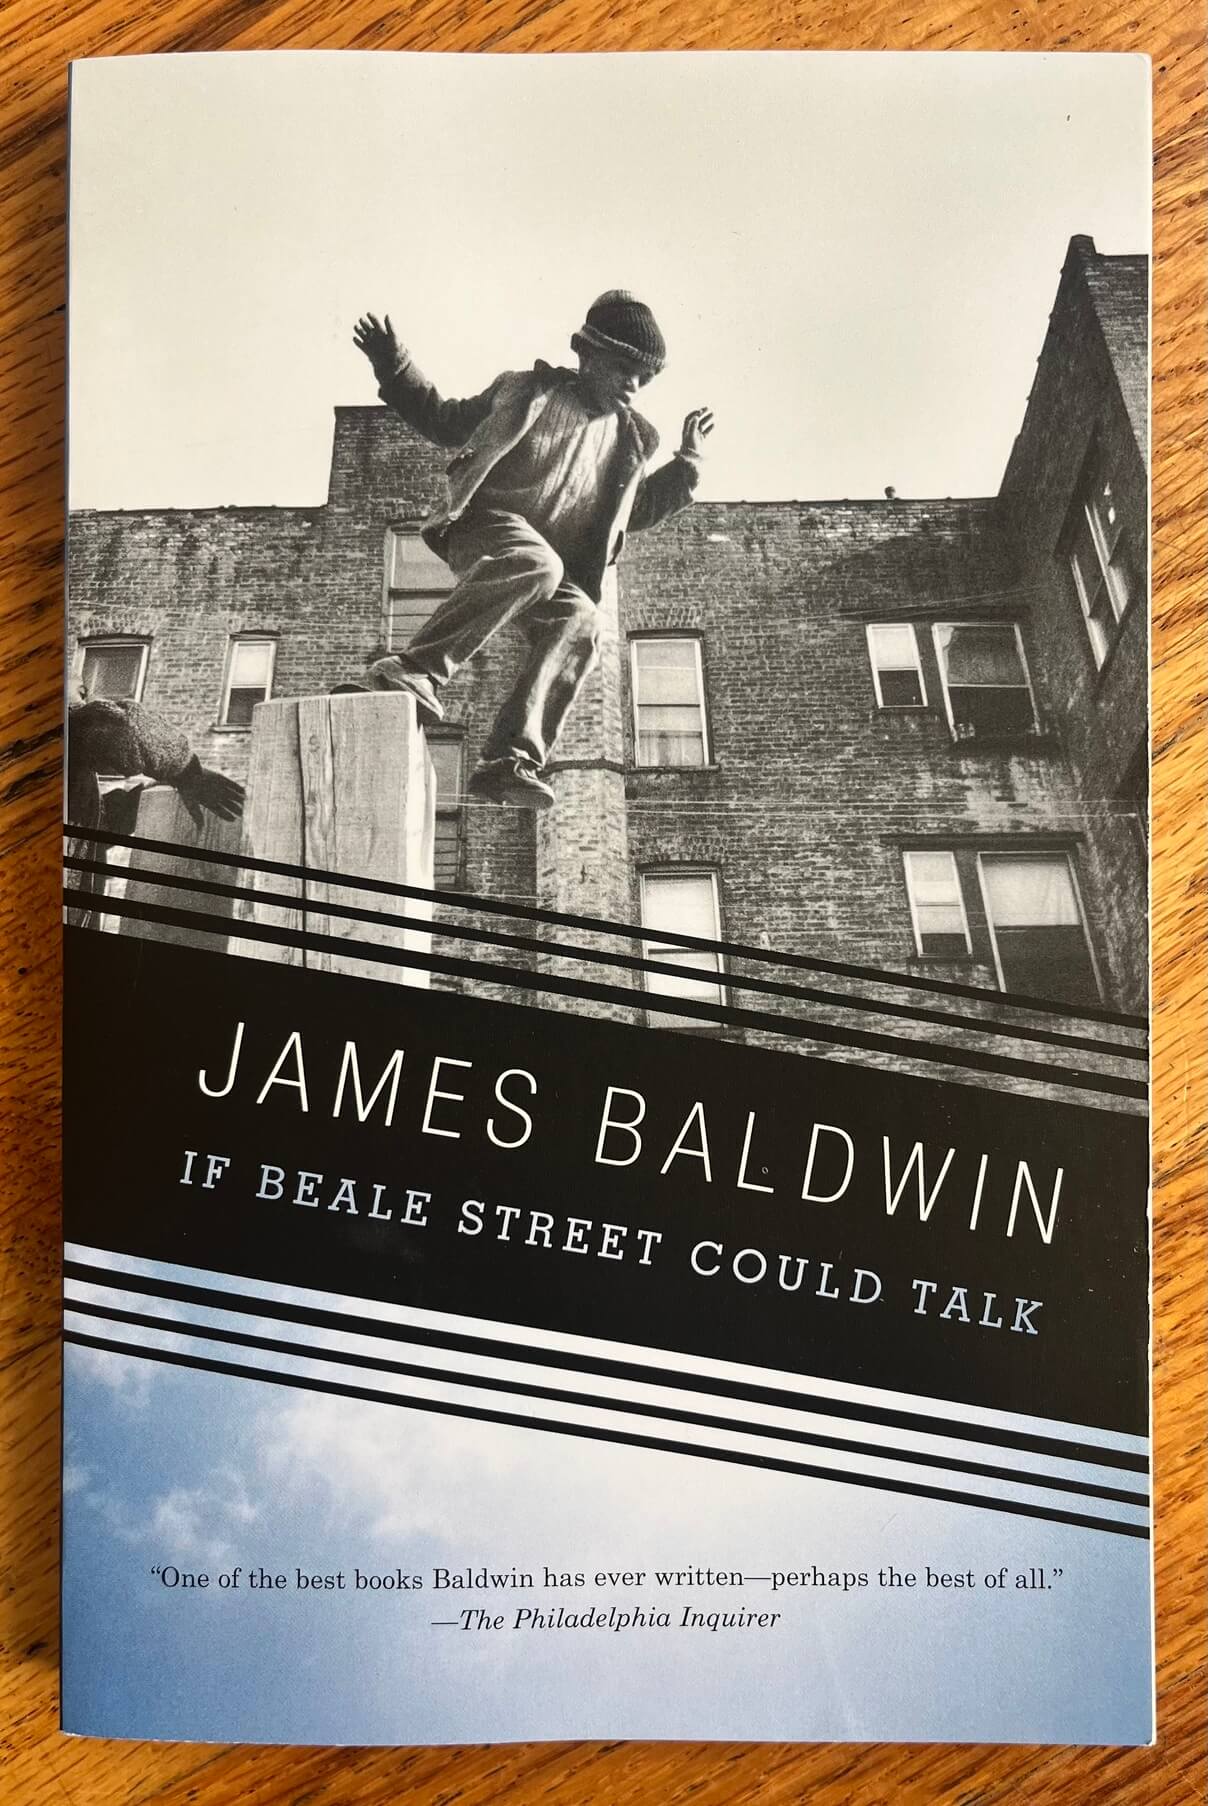 “If Beale Street Could Talk” by James Baldwin